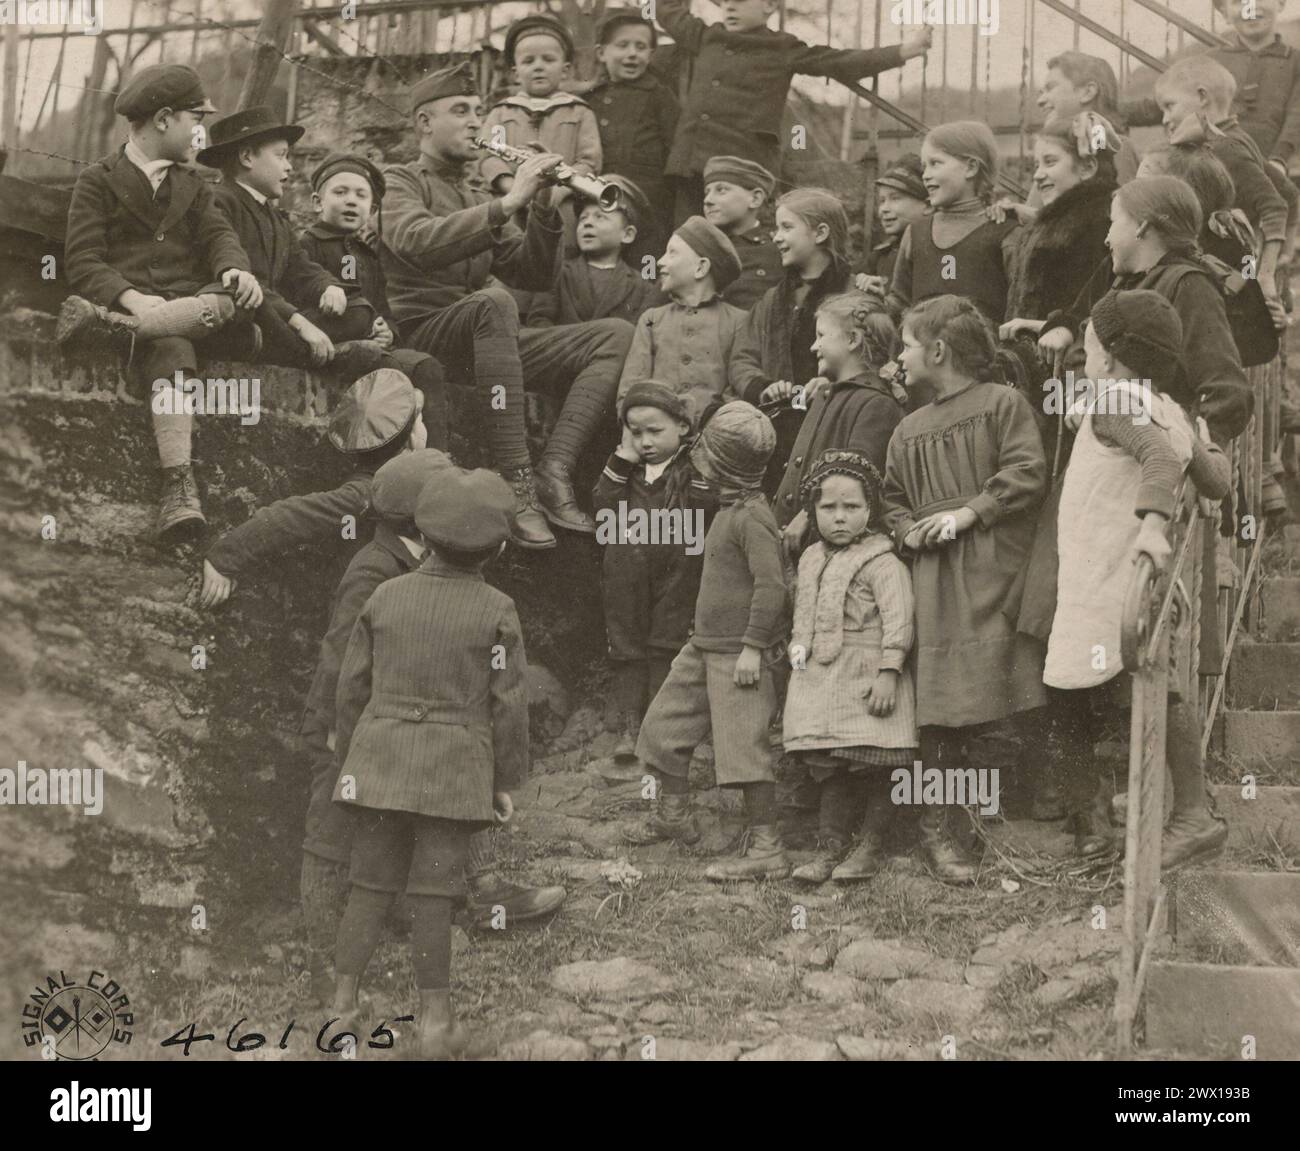 MUSICIAN JOE FOSTER OF THE 51st Infantry Band, 4th Army Corps, teaching German children American songs. He is seated on a wall in one of the village streets and children are grouped about him singing. Cochem, Germany ca. 1919 Stock Photo